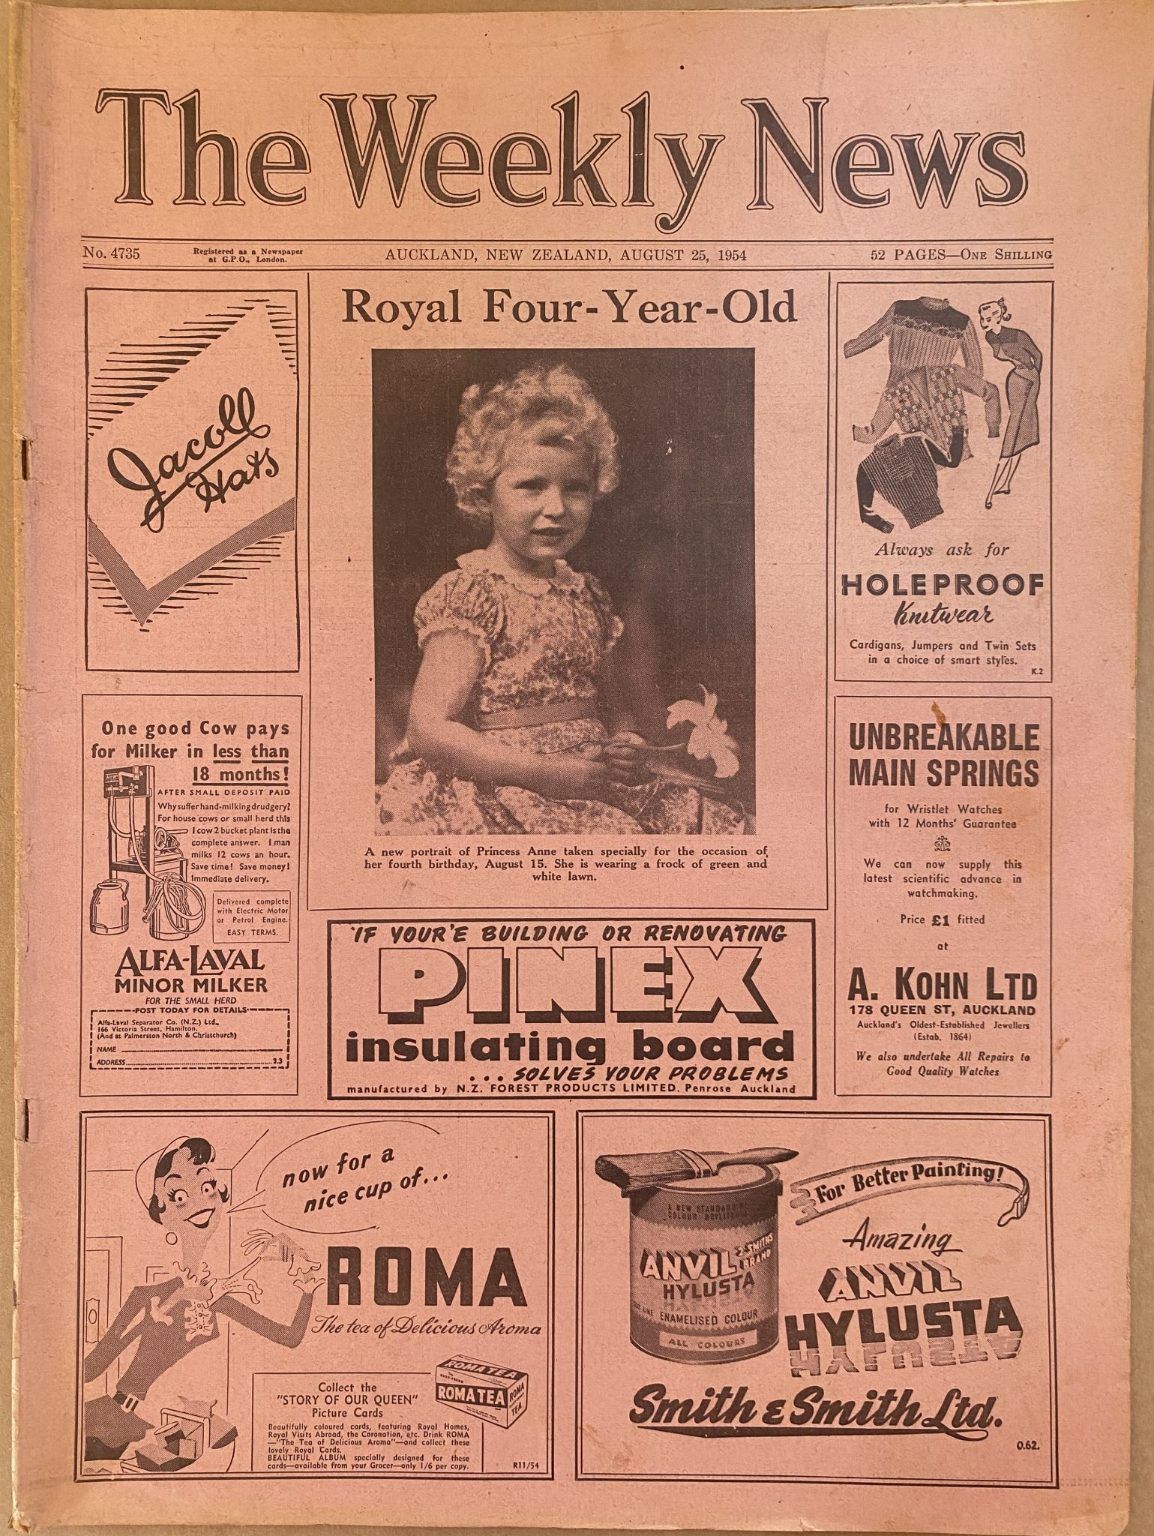 OLD NEWSPAPER: The Weekly News - No. 4735, 25 August 1954